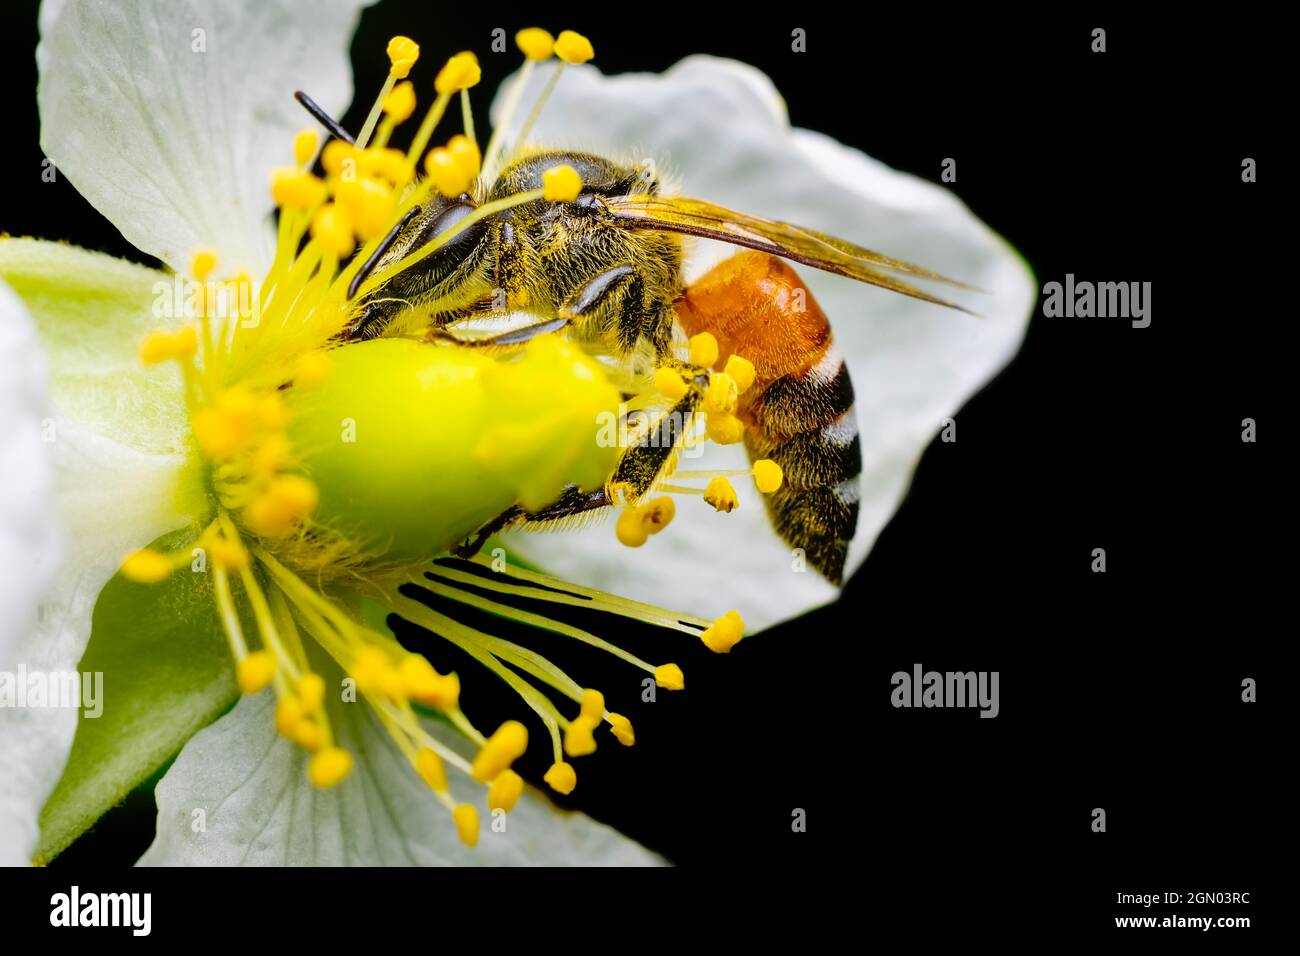 Honey bee getting nectar from the Jamaican cherry flower also known as Strawberry tree flower and pollinate the flower. Used selective focus. Stock Photo